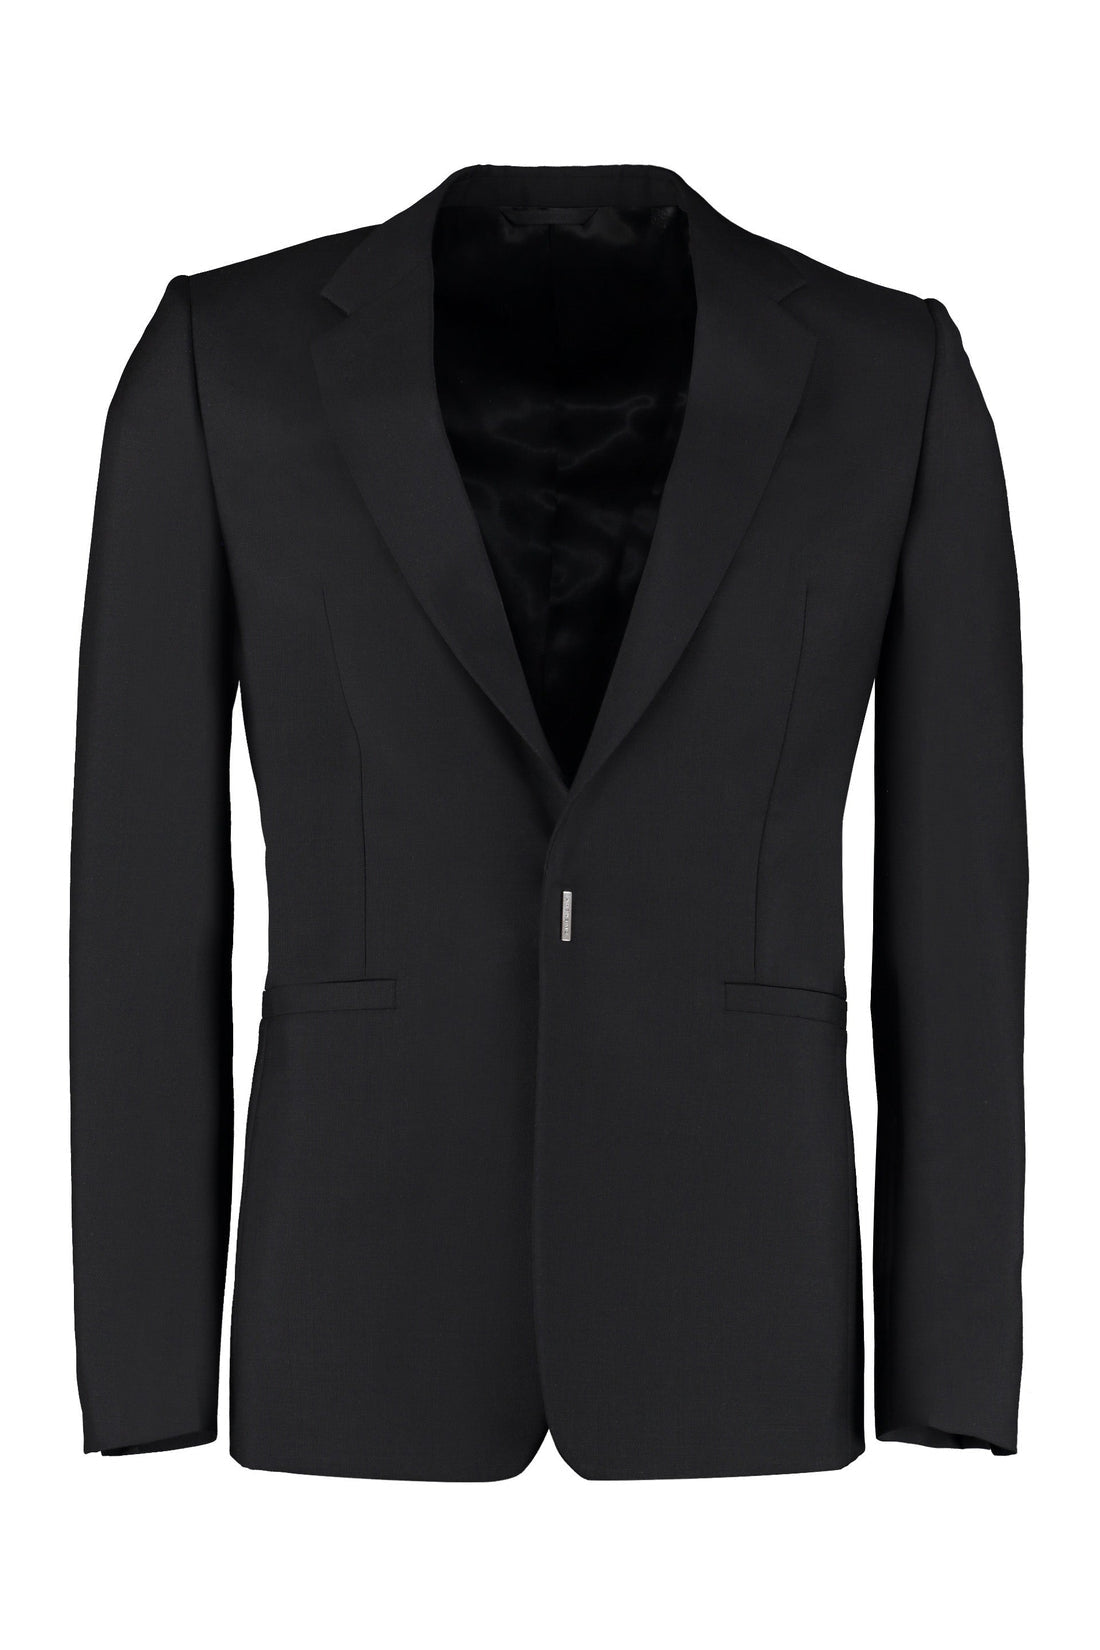 Givenchy-OUTLET-SALE-Wool and mohair jacket-ARCHIVIST